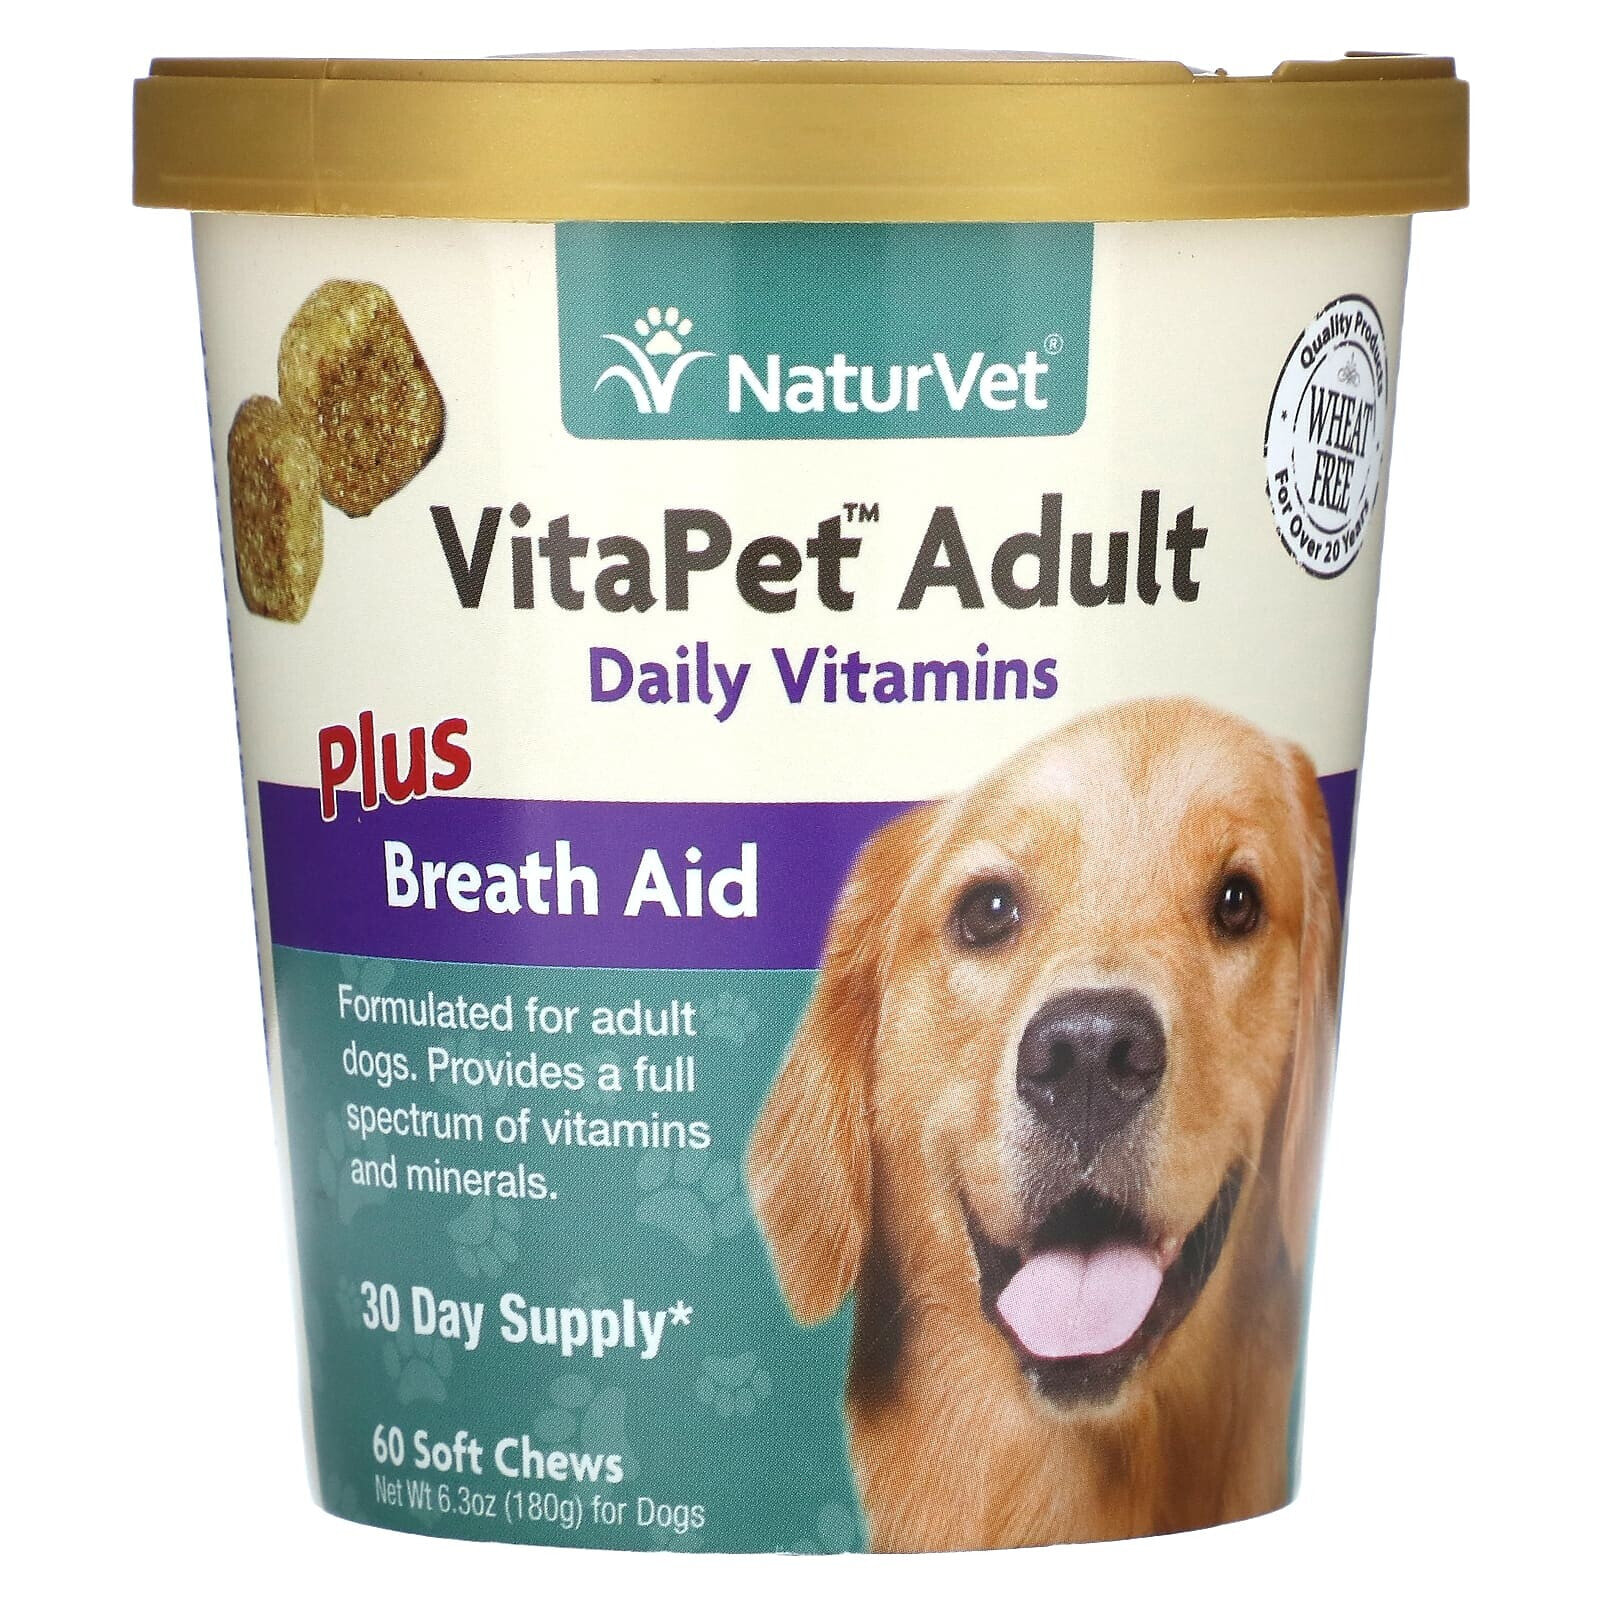 VitaPet Adult , Daily Vitamins Plus Breath Aid, For Dogs, 60 Soft Chews, 6.3 oz (180 g)